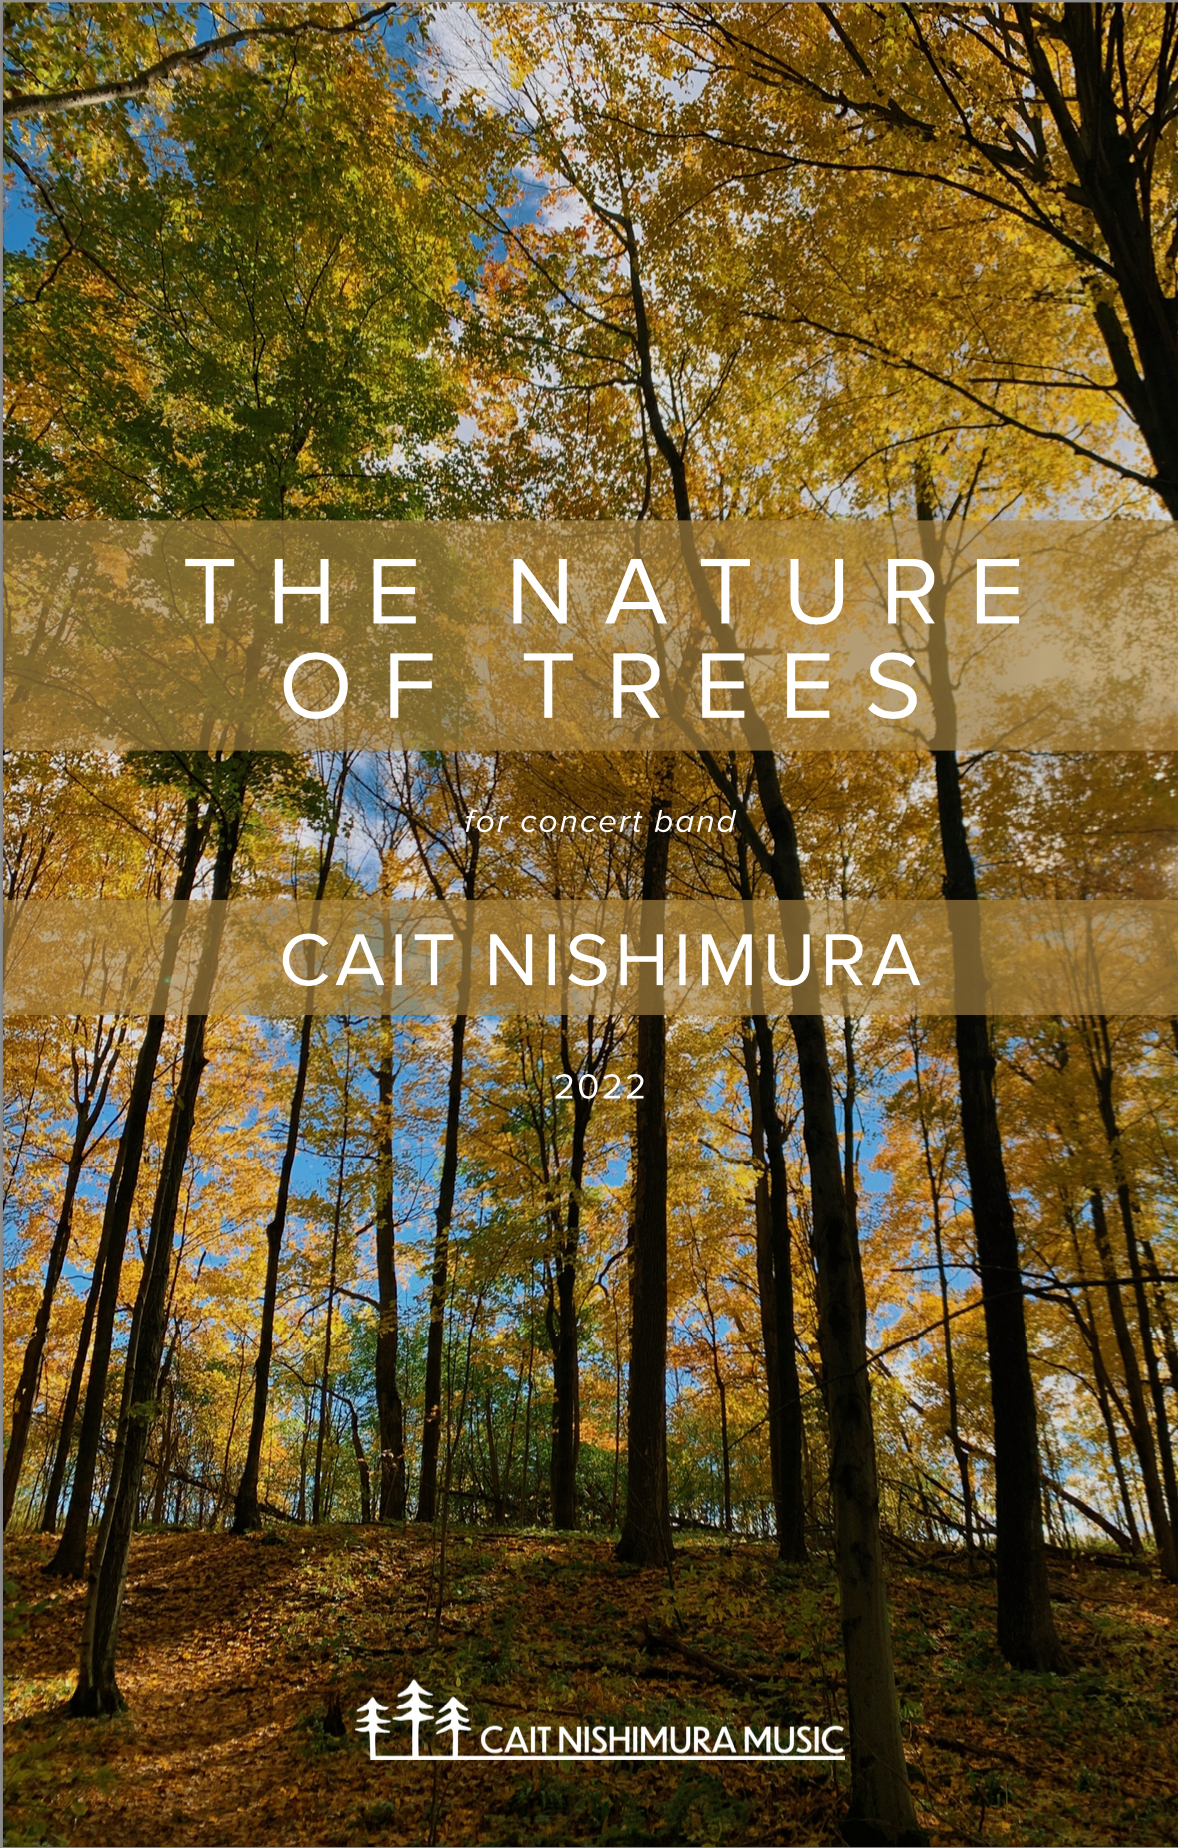 The Nature Of Trees (Score Only) by Cait Nishimura